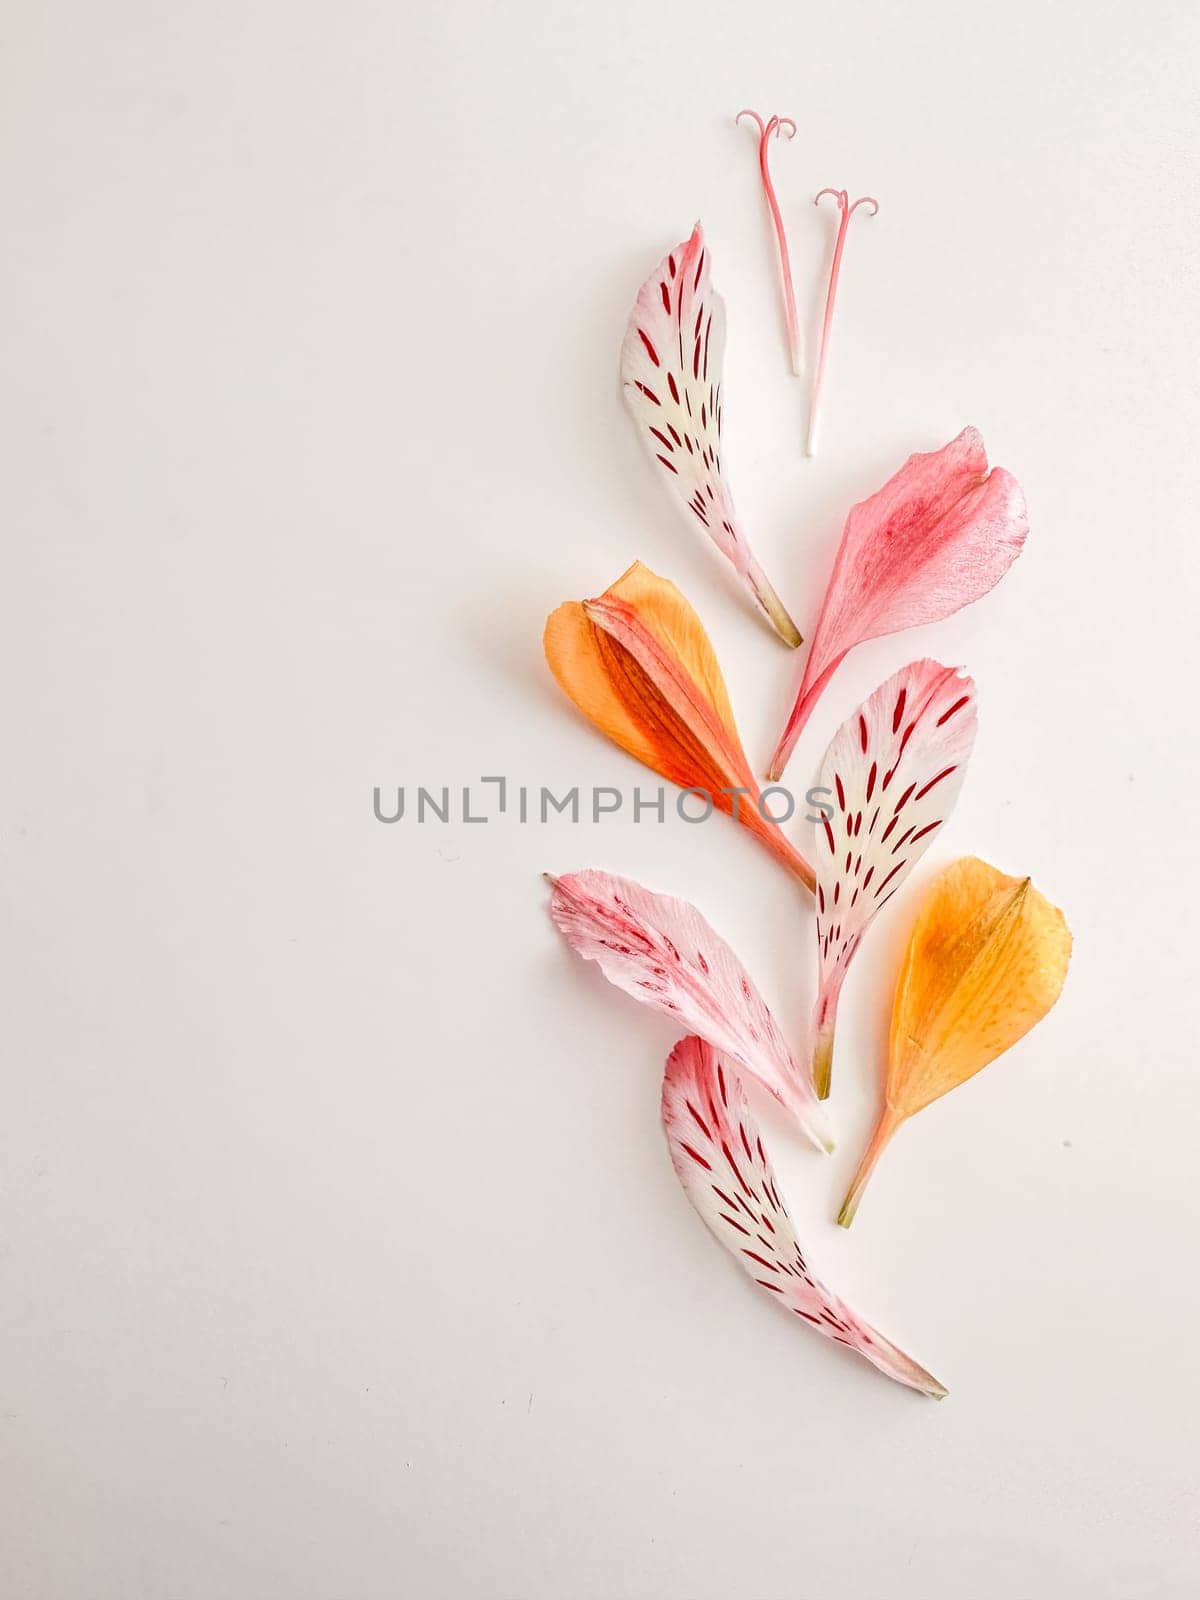 Pattern of flower petals on a white background with space for text. High quality photo